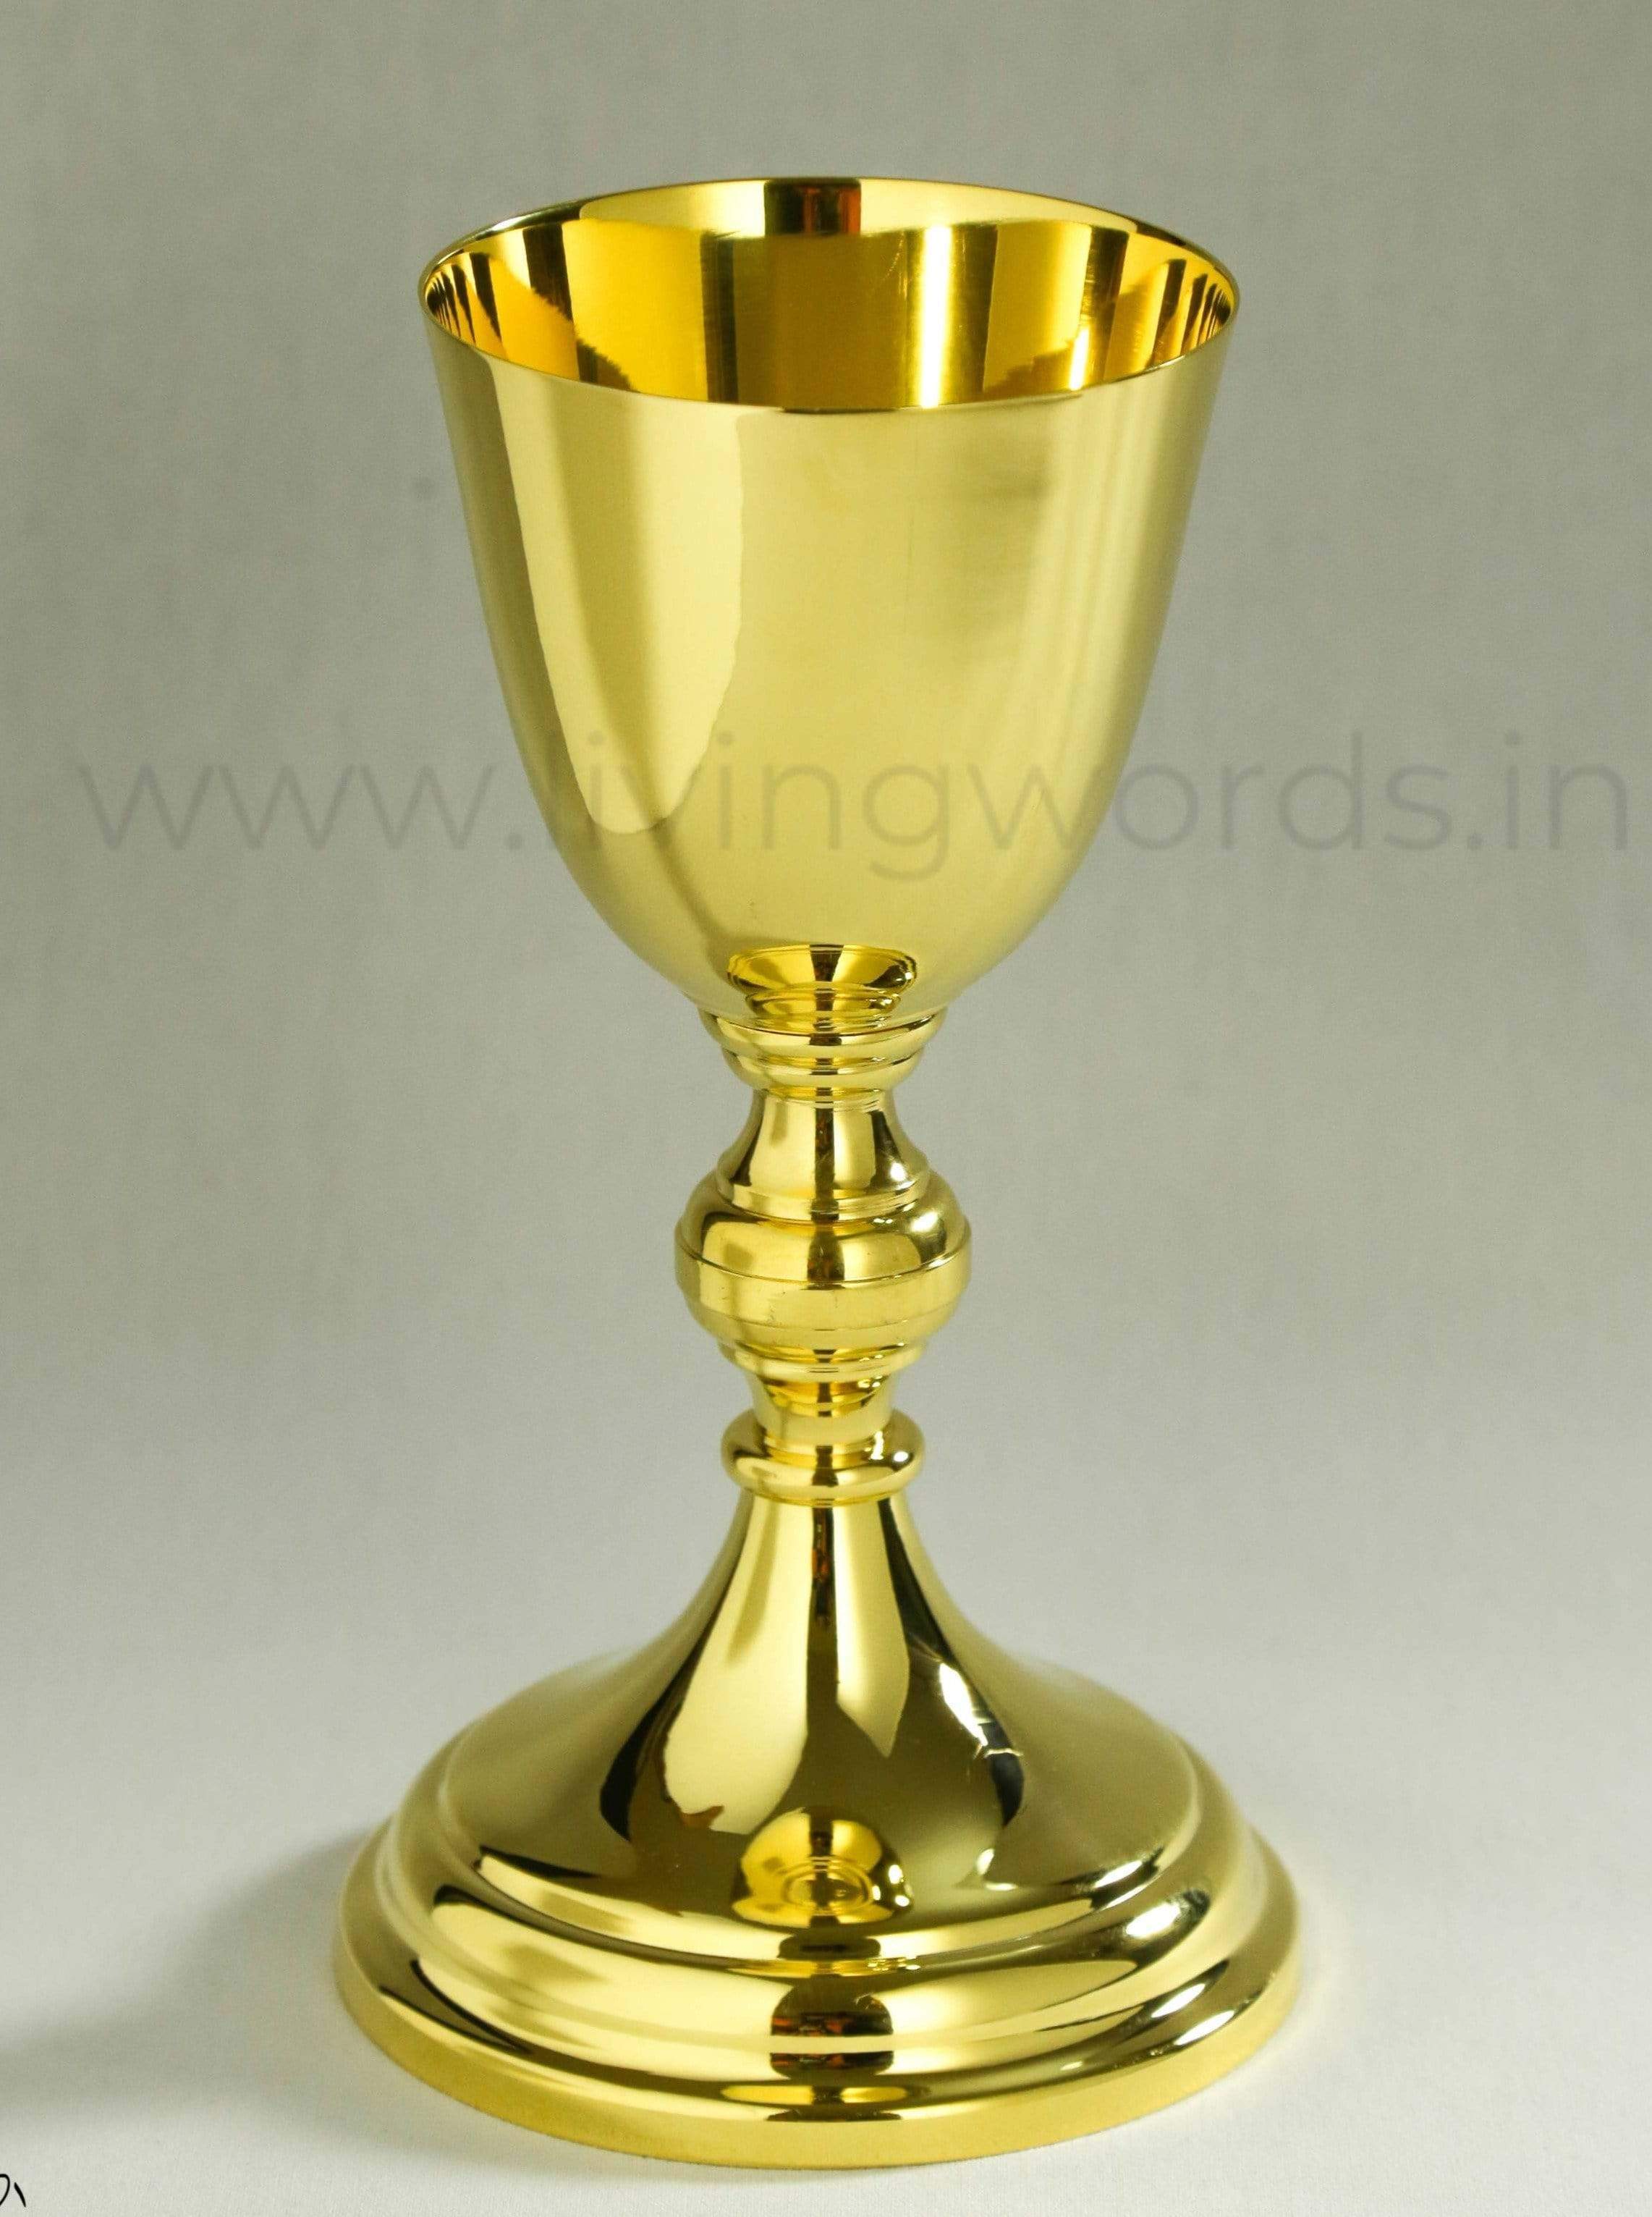 Living Words Church Articles Chalice & Paten Set